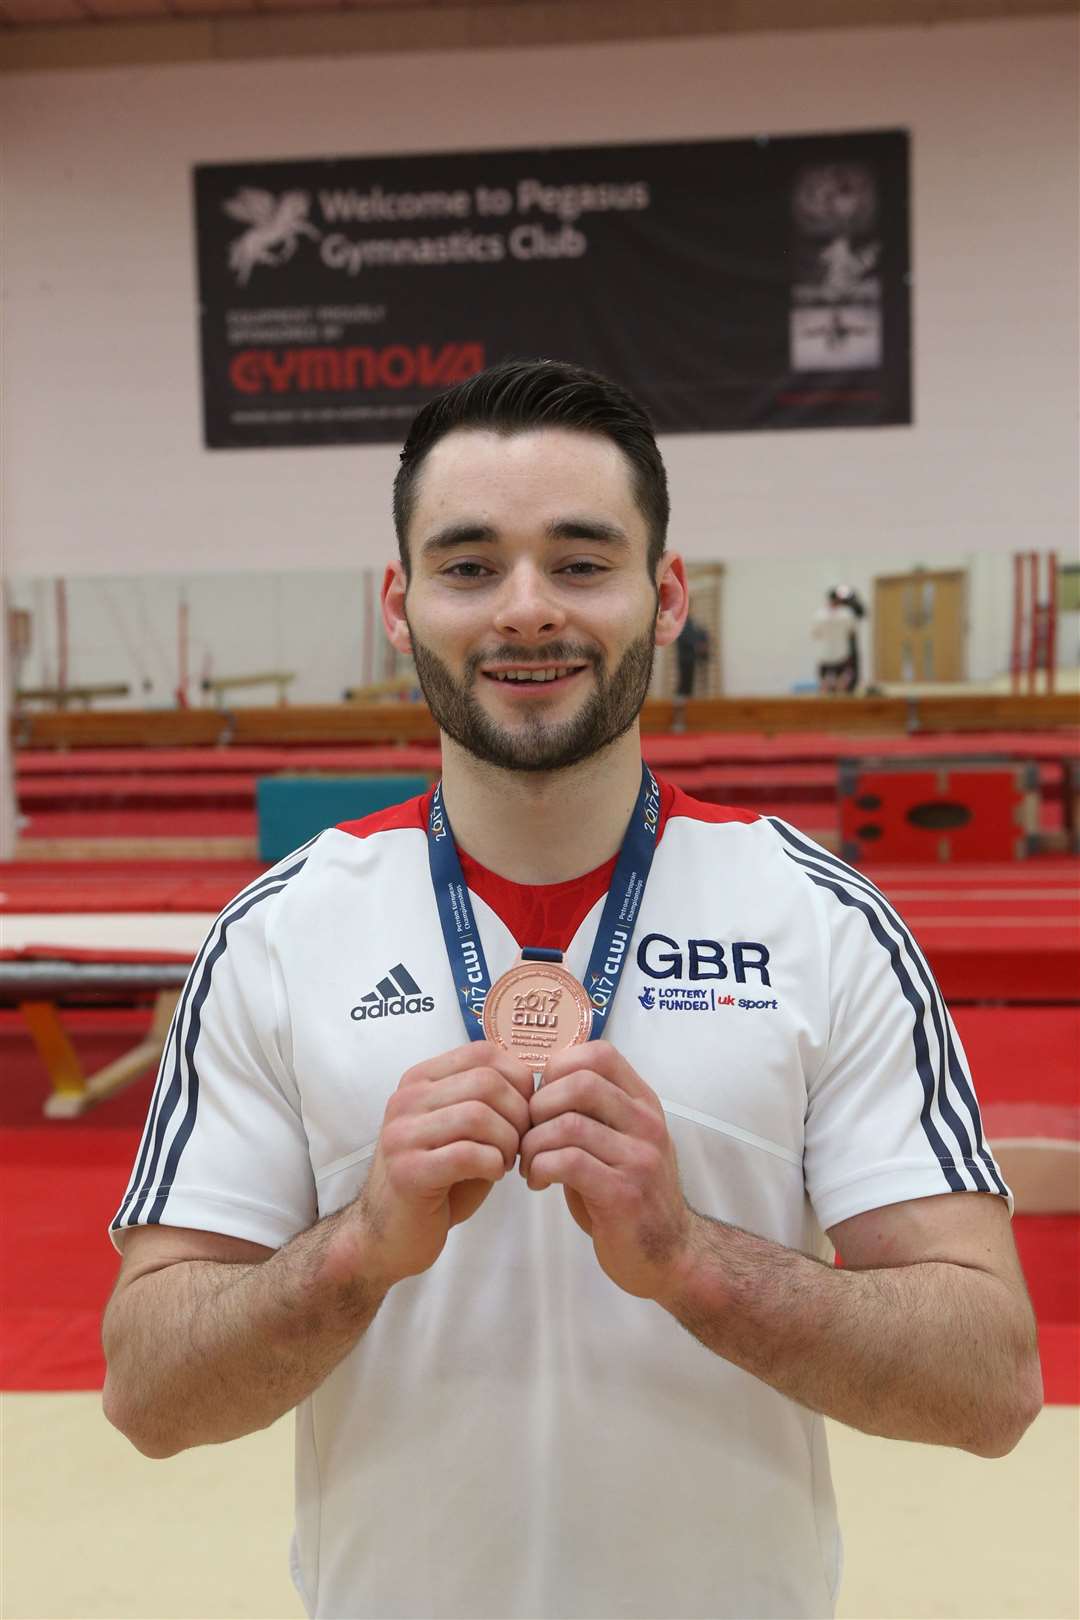 Maidstone's James Hall may have been born in Australia but after moving to the town as a toddler his love of gymnastics was triggered at the Pegasus Gymnastics Club in Maidstone where he's trained since he was seven